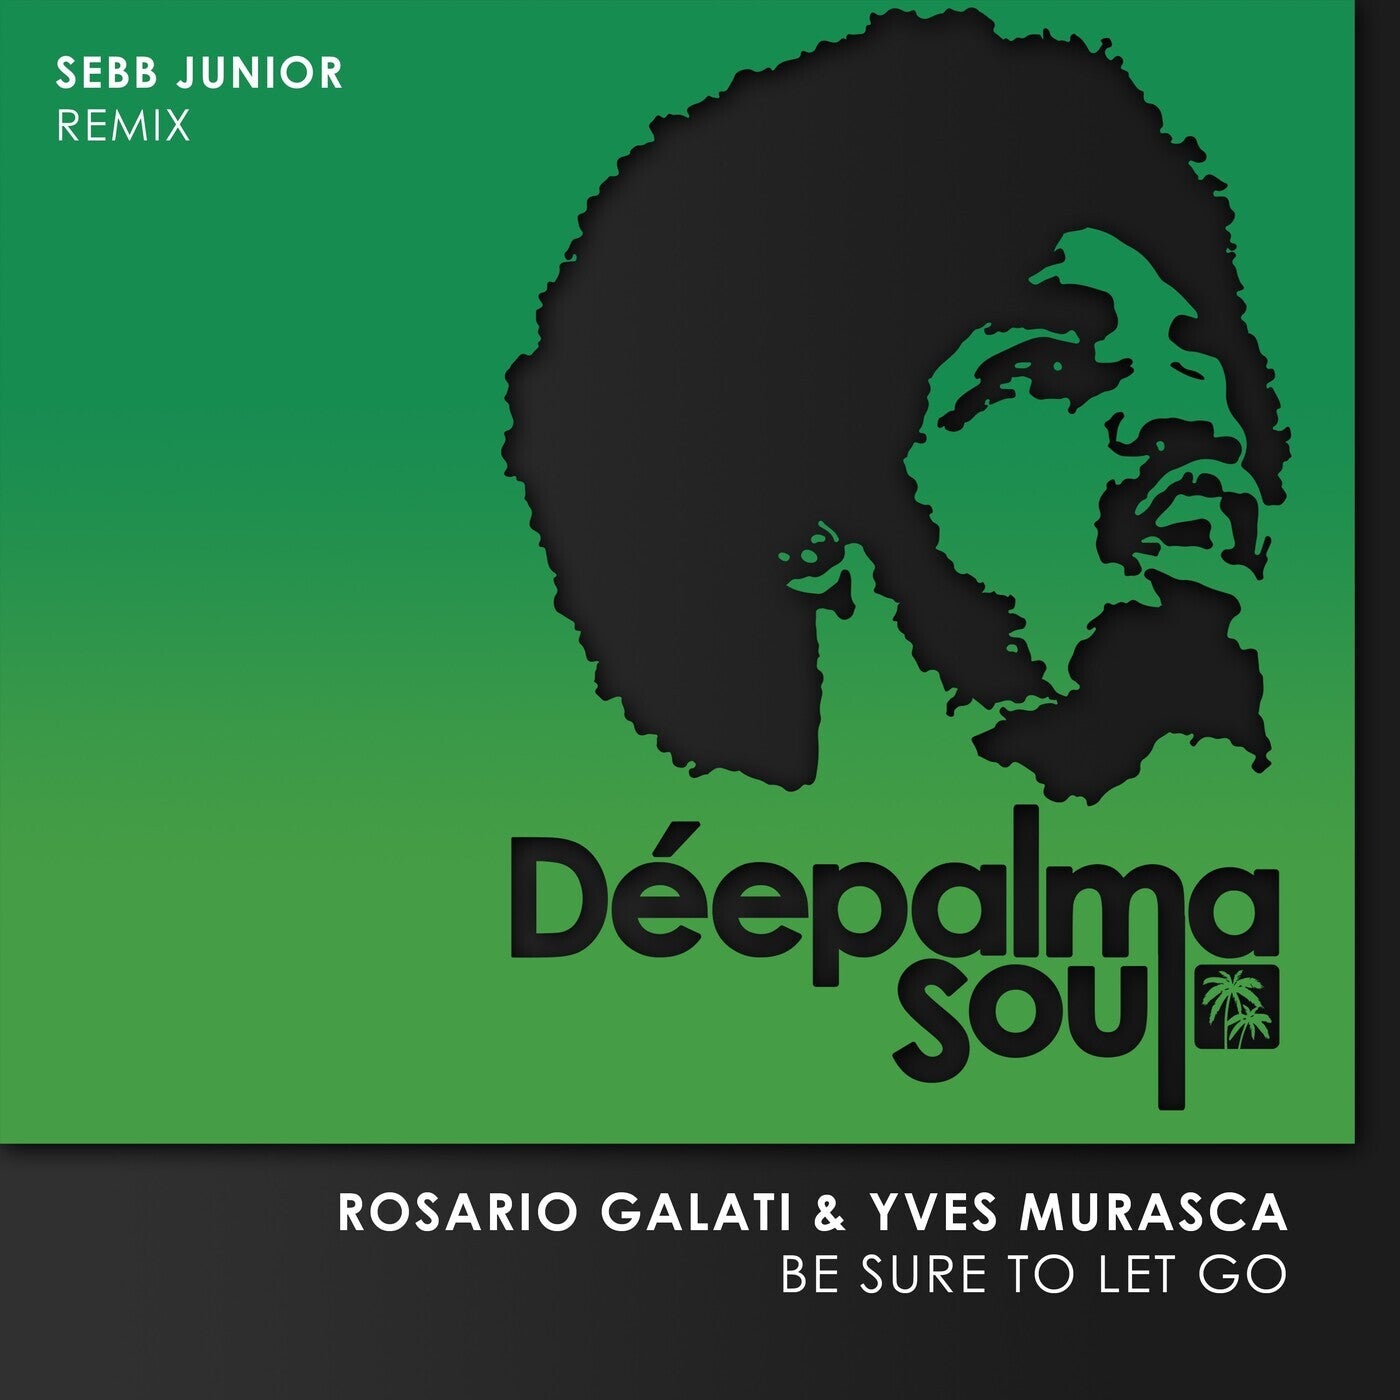 Cover - Yves Murasca, Rosario Galati - Be Sure to Let Go (Sebb Junior Extended Remix)